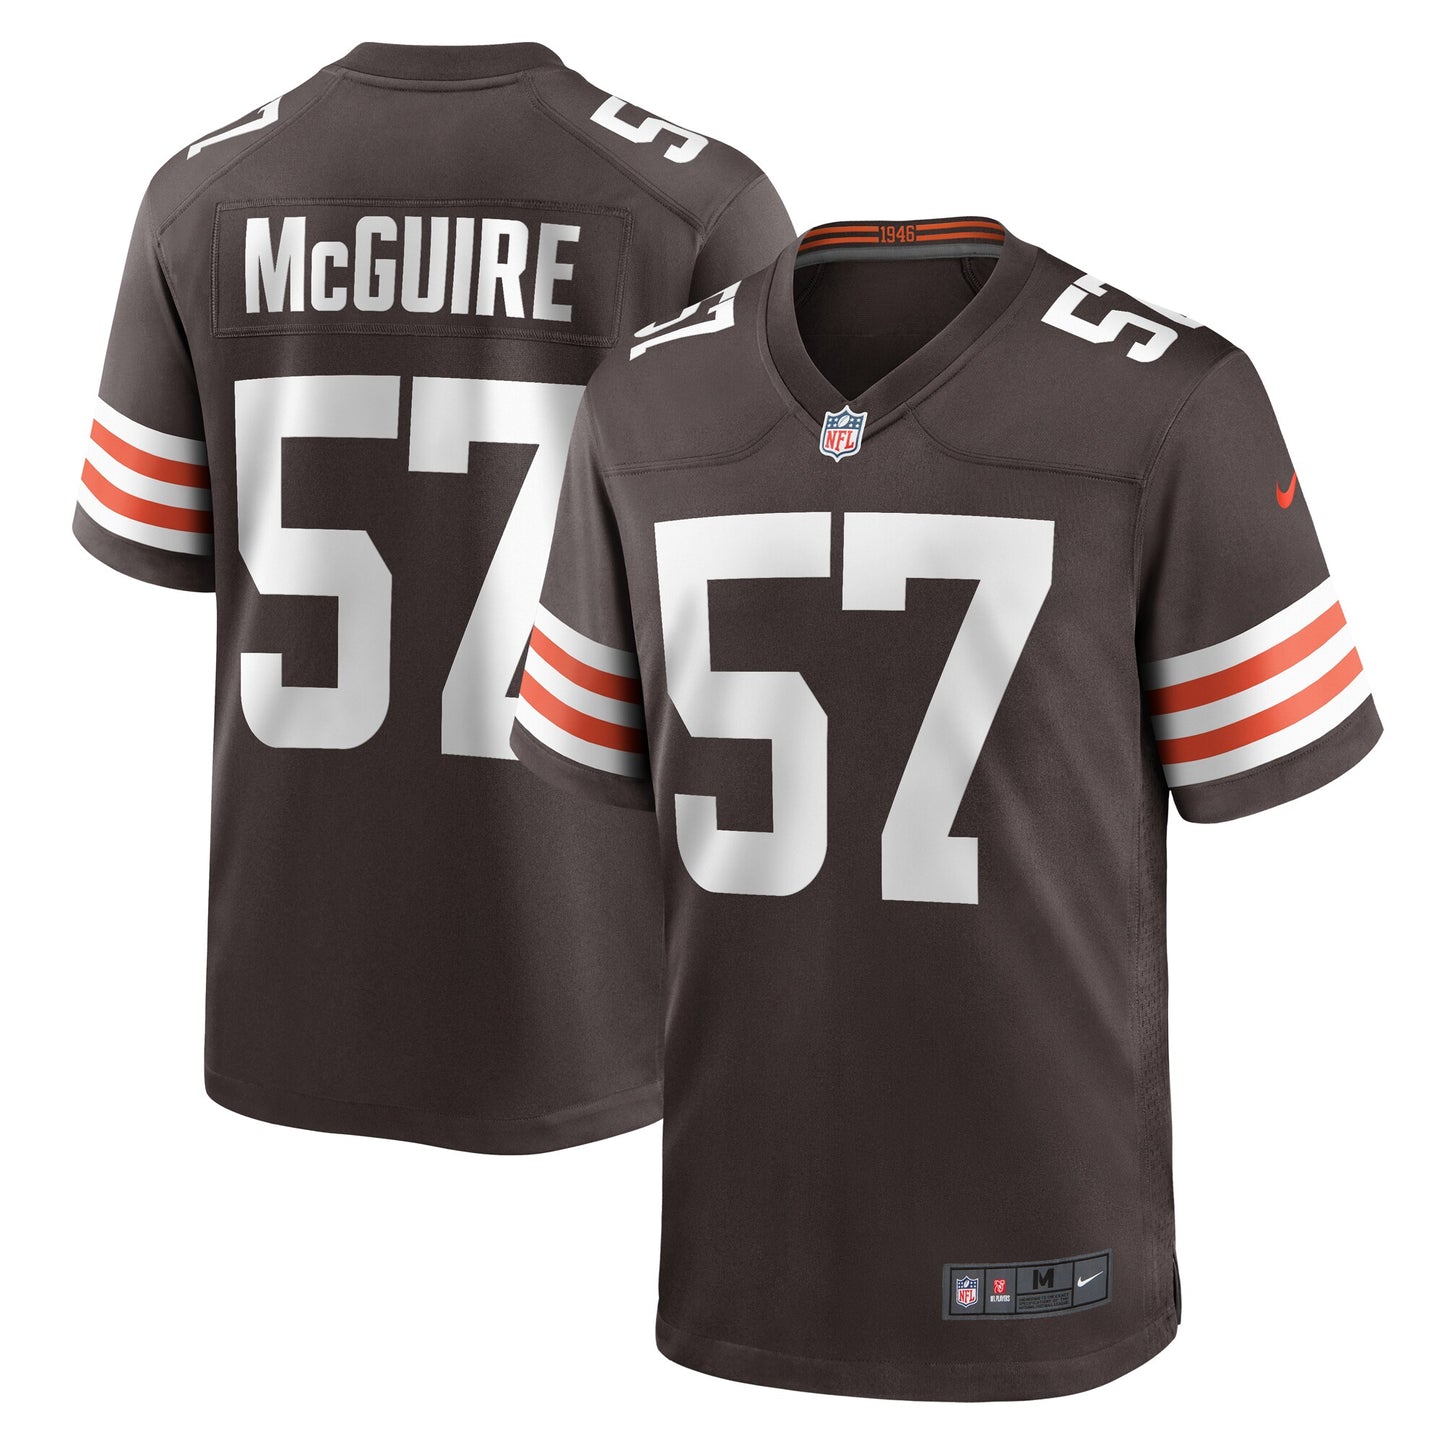 Isaiah McGuire Cleveland Browns Nike Team Game Jersey - Brown